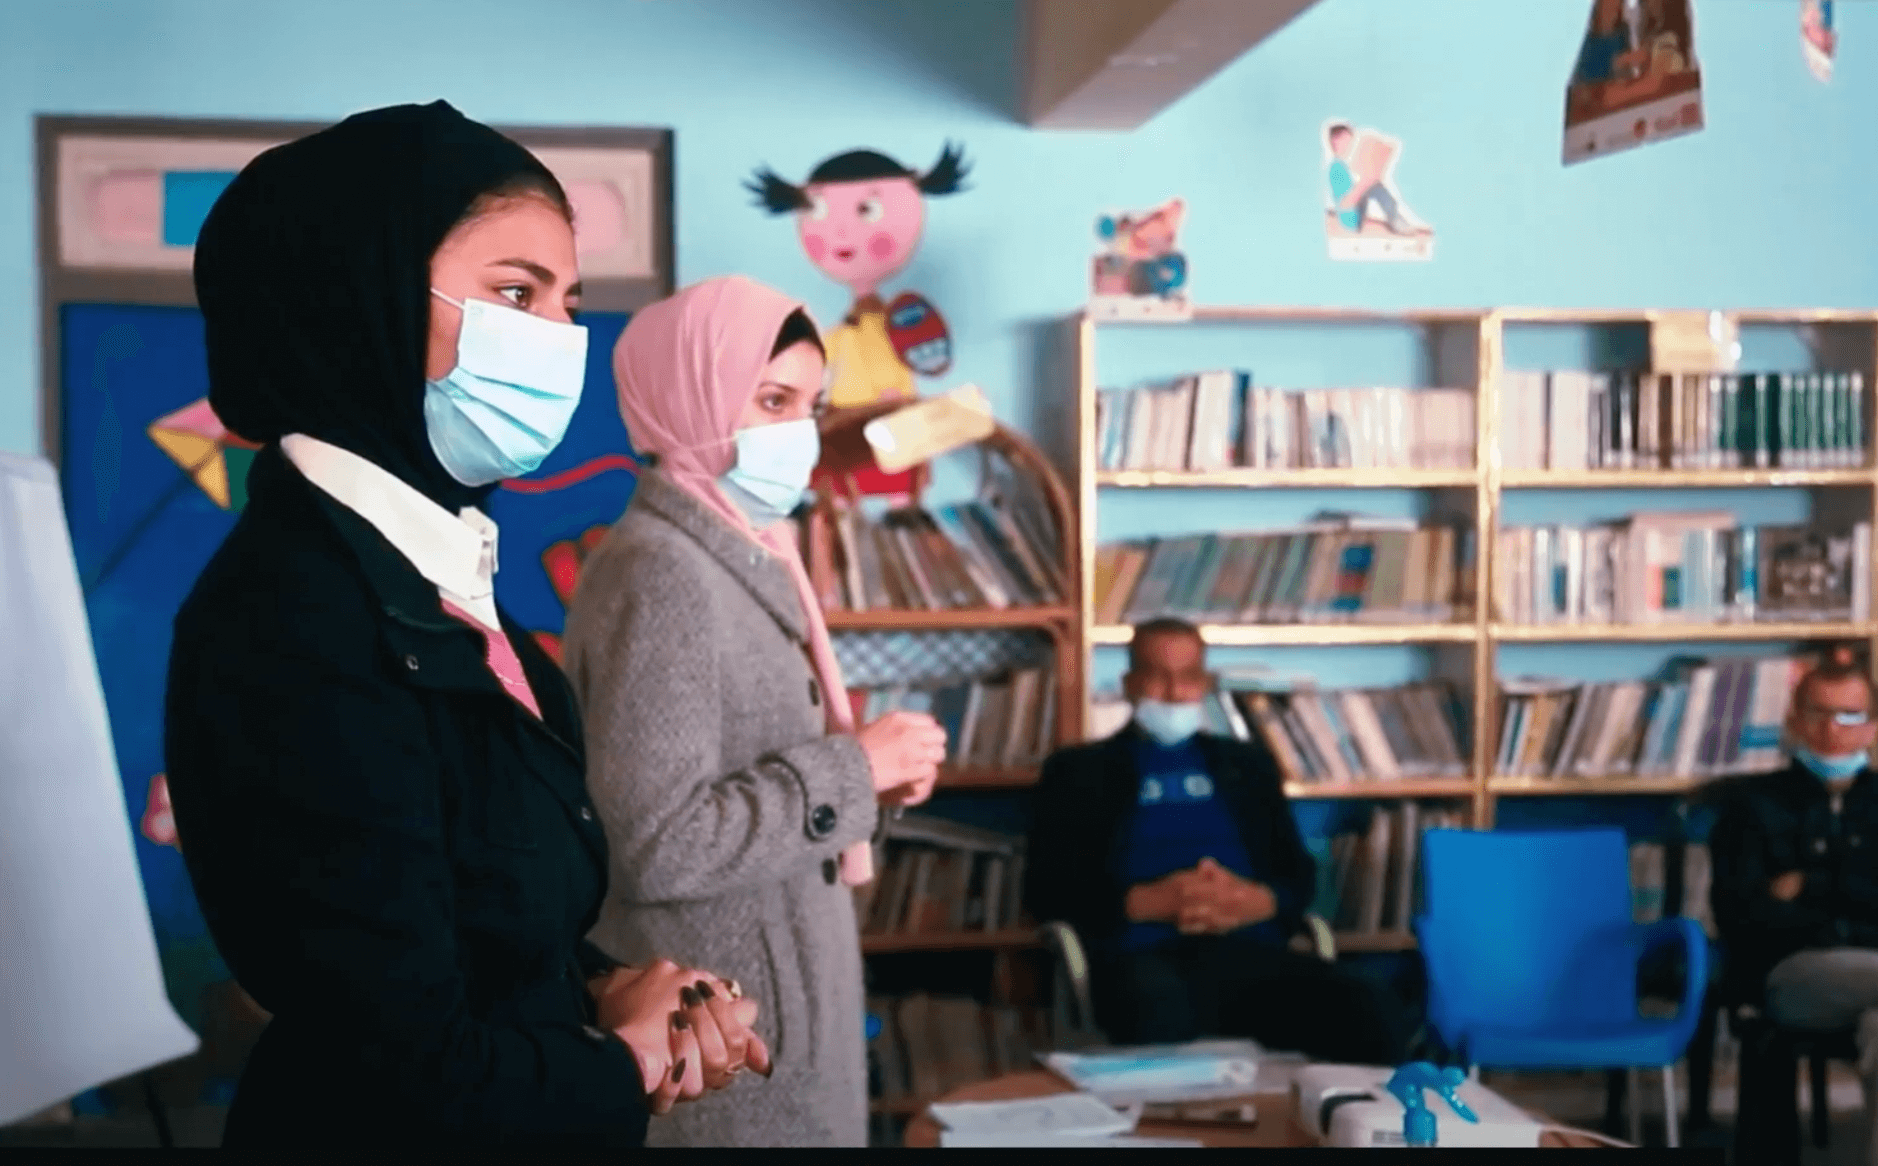 Hala Al-Nakhalah (20) received training on women’s empowerment which was funded by Trócaire. Credit: Women’s Affairs Centre